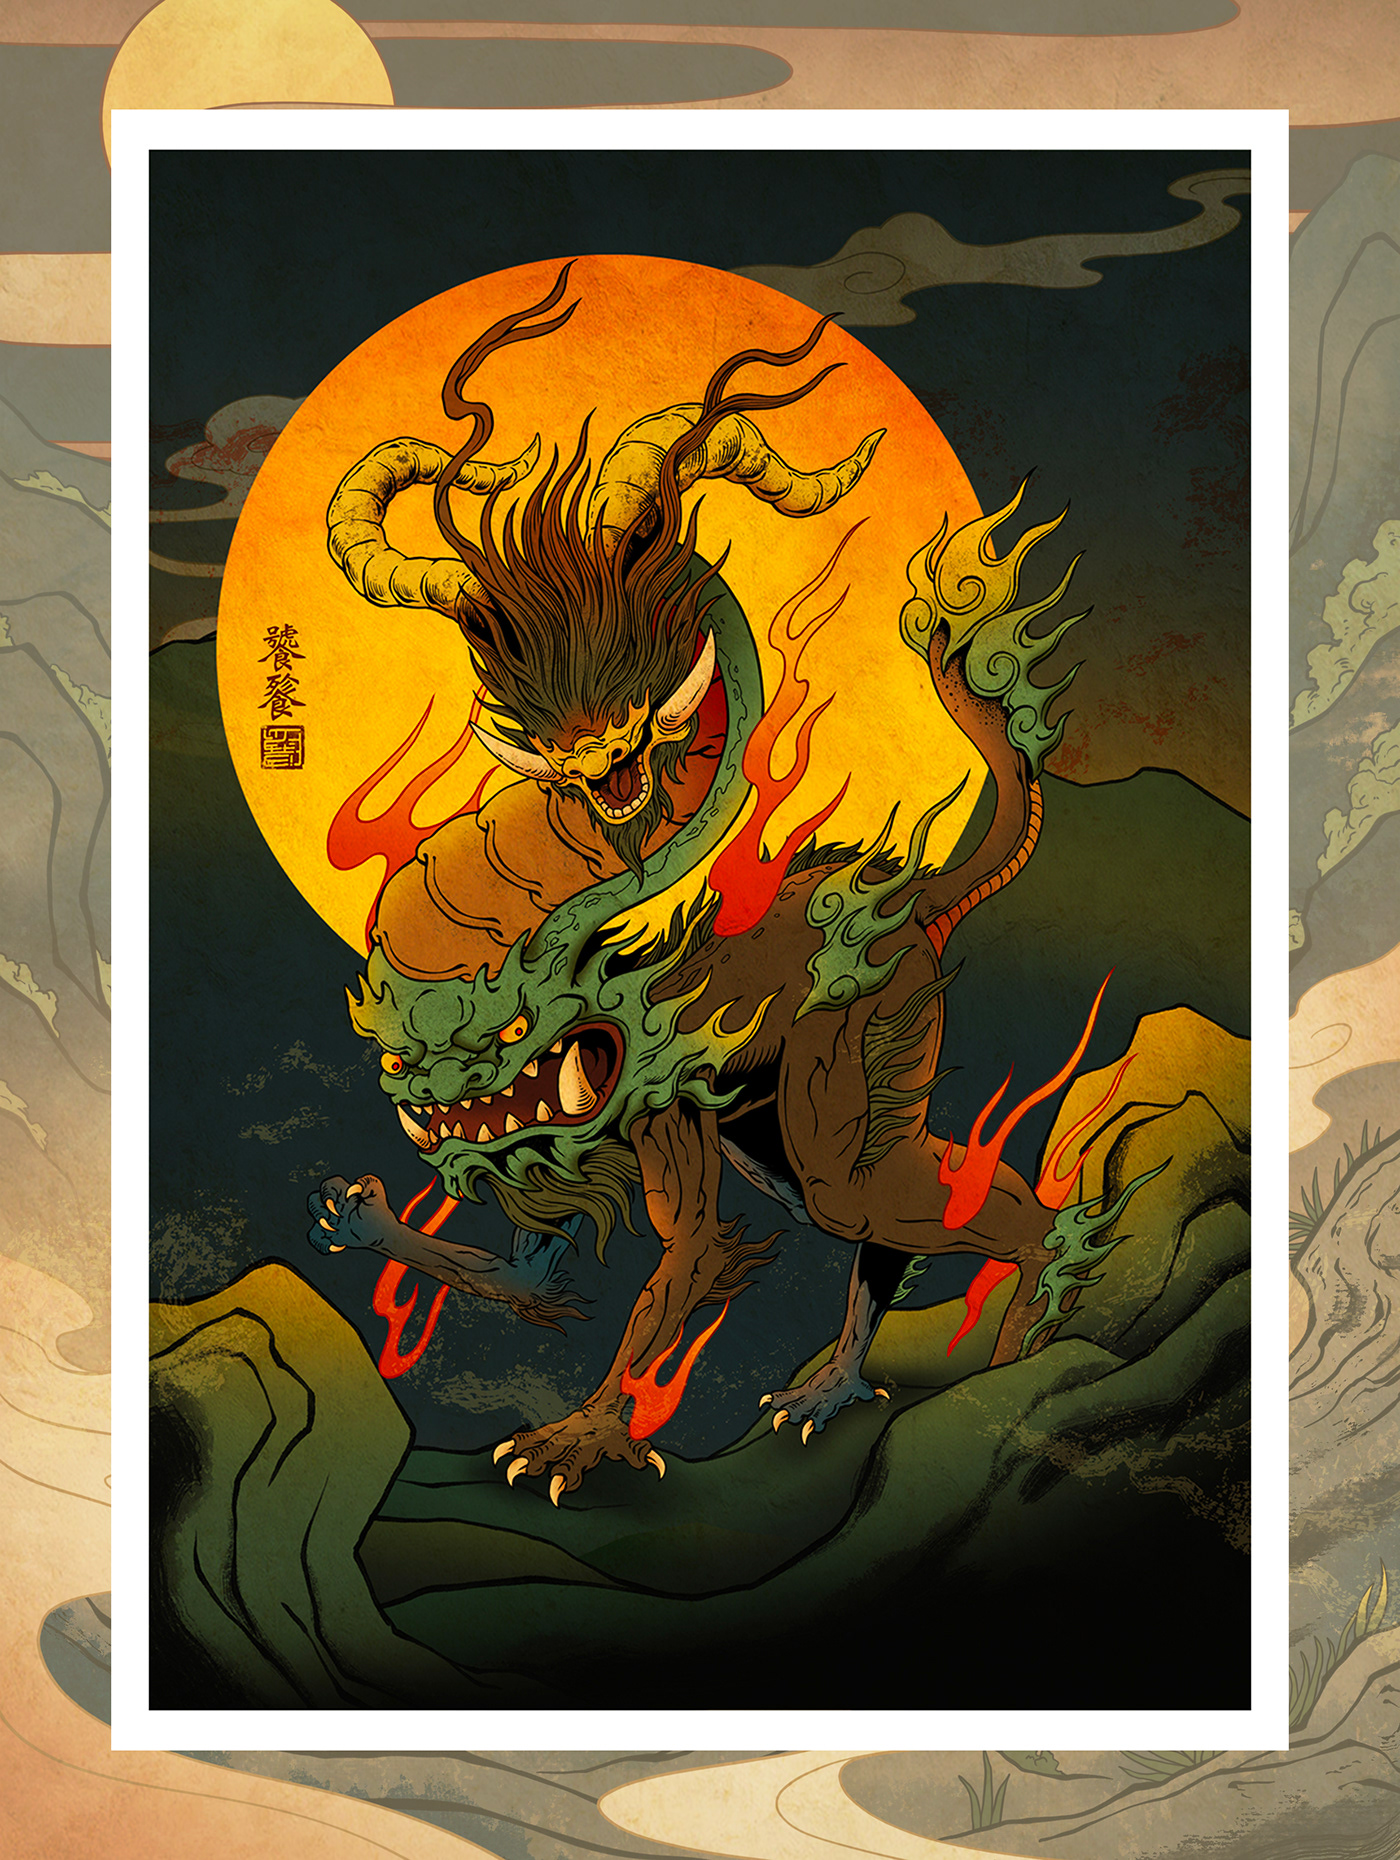 ILLUSTRATION  painting   Drawing  Illustrator monster oriental artist Character design  image Chinese style